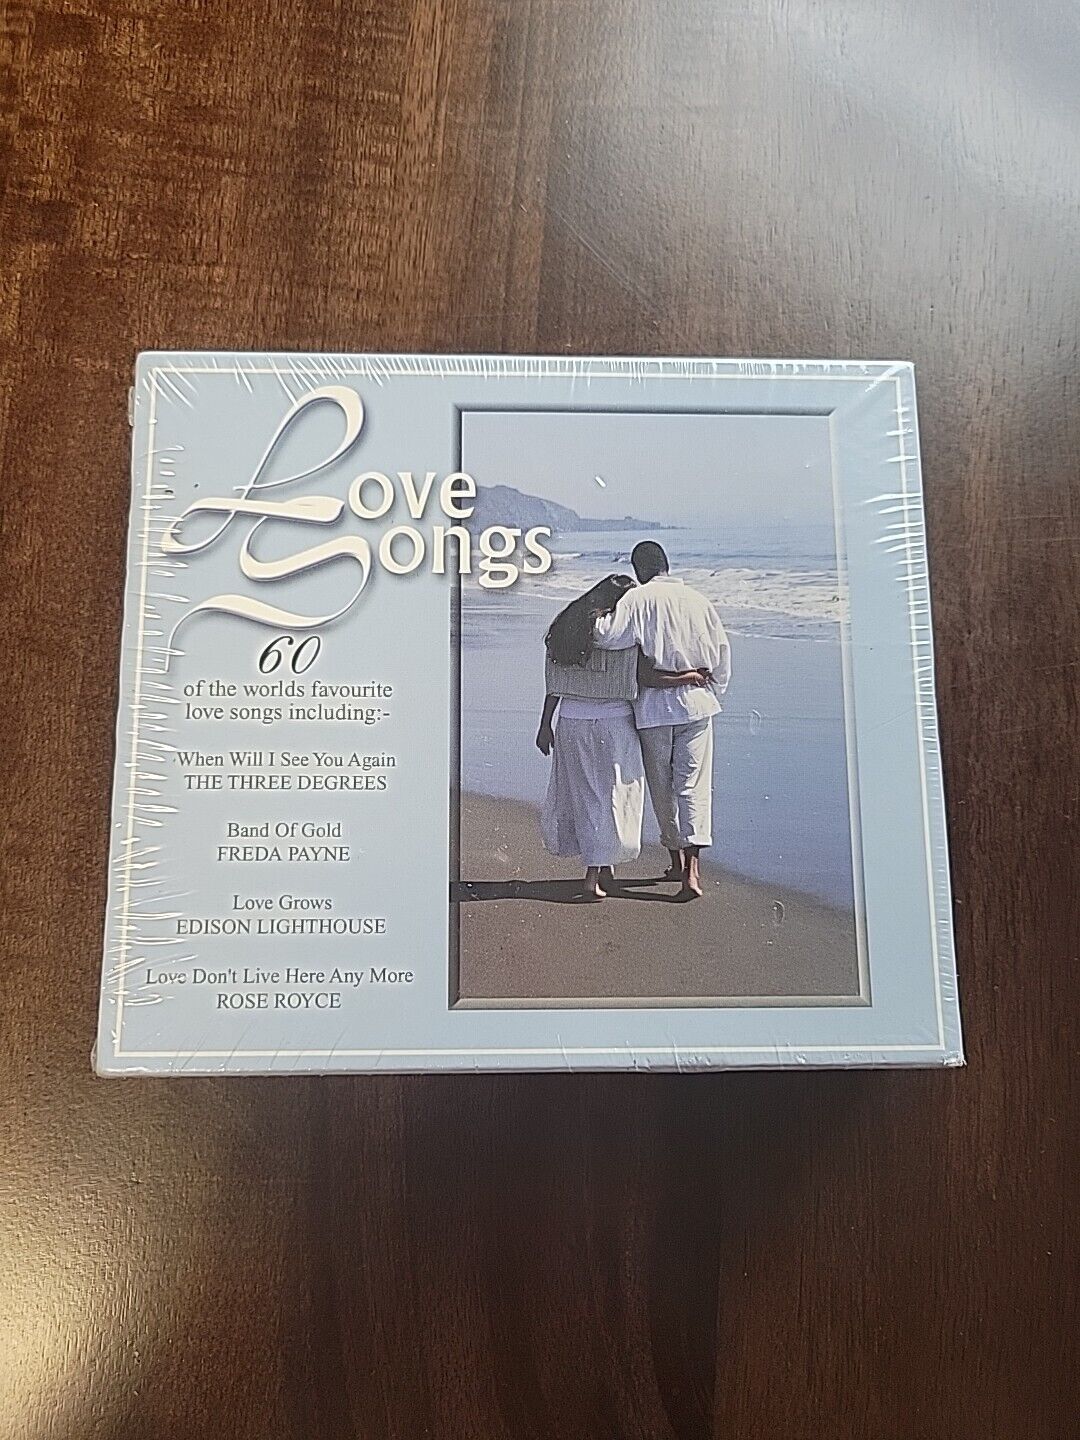 Time Music - Love Songs 60 Classics CD 3 Disc Box Set NEW FACTORY SEALED